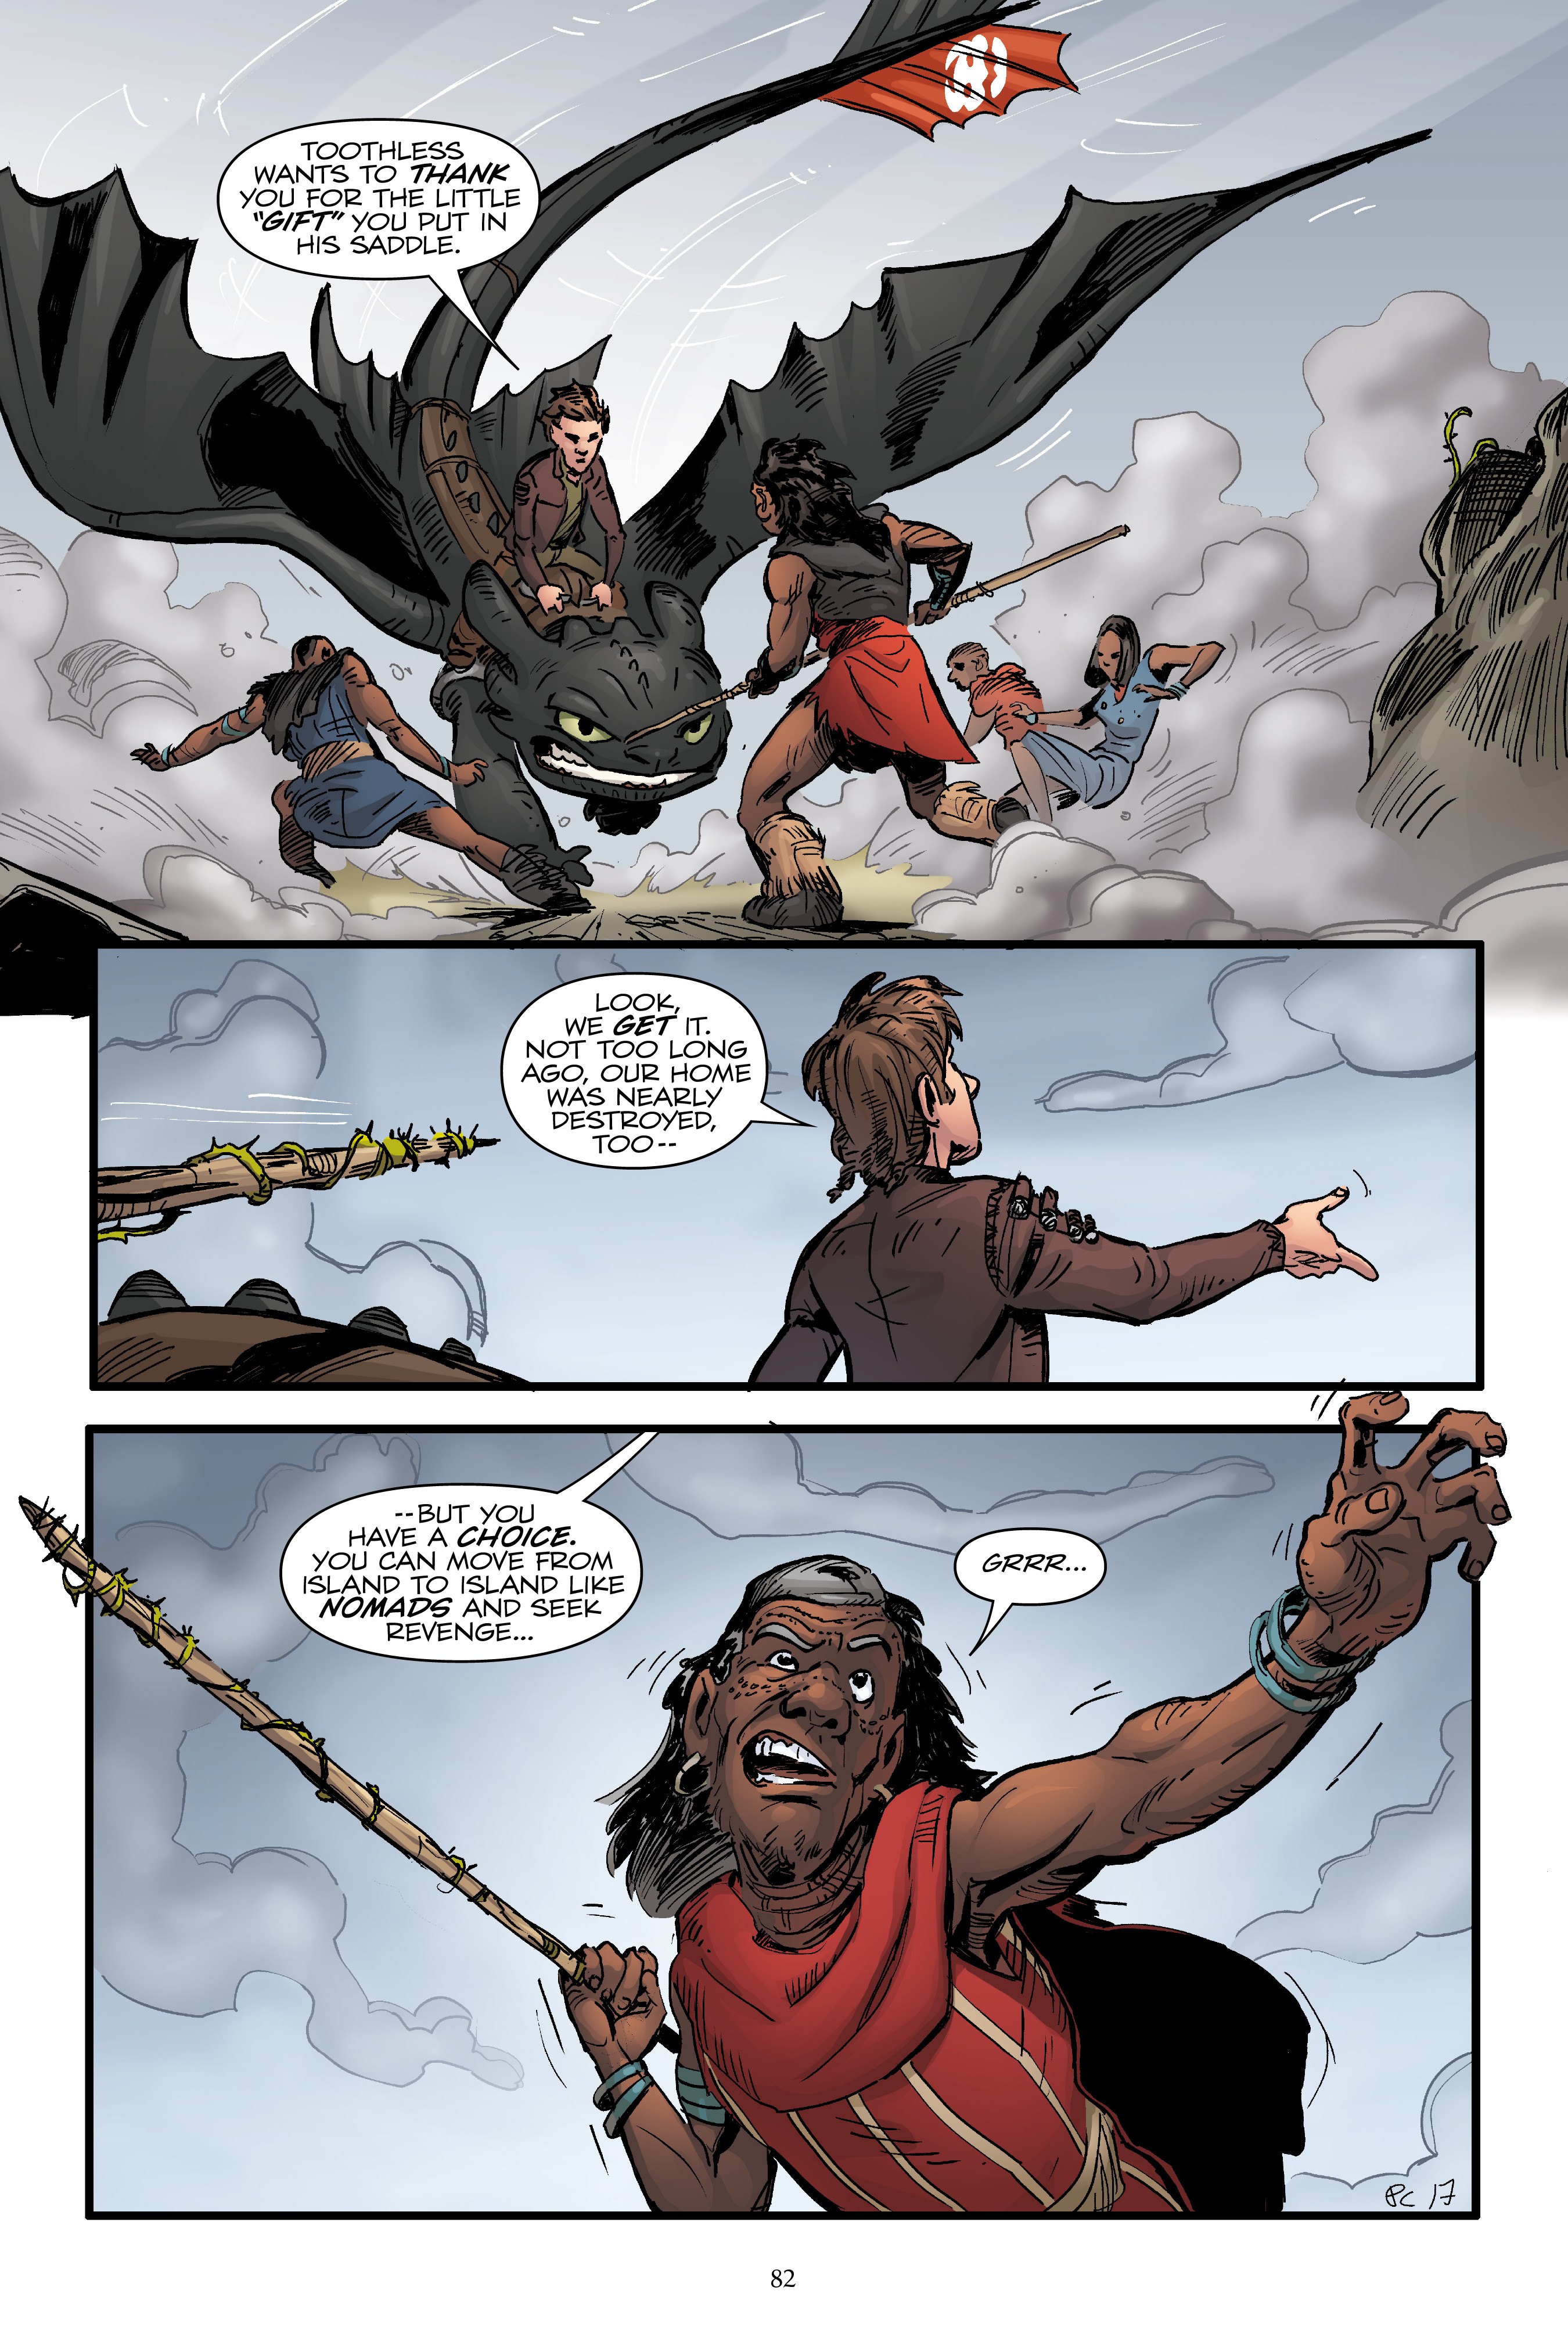 Read online How to Train Your Dragon: Dragonvine comic -  Issue # TPB - 81